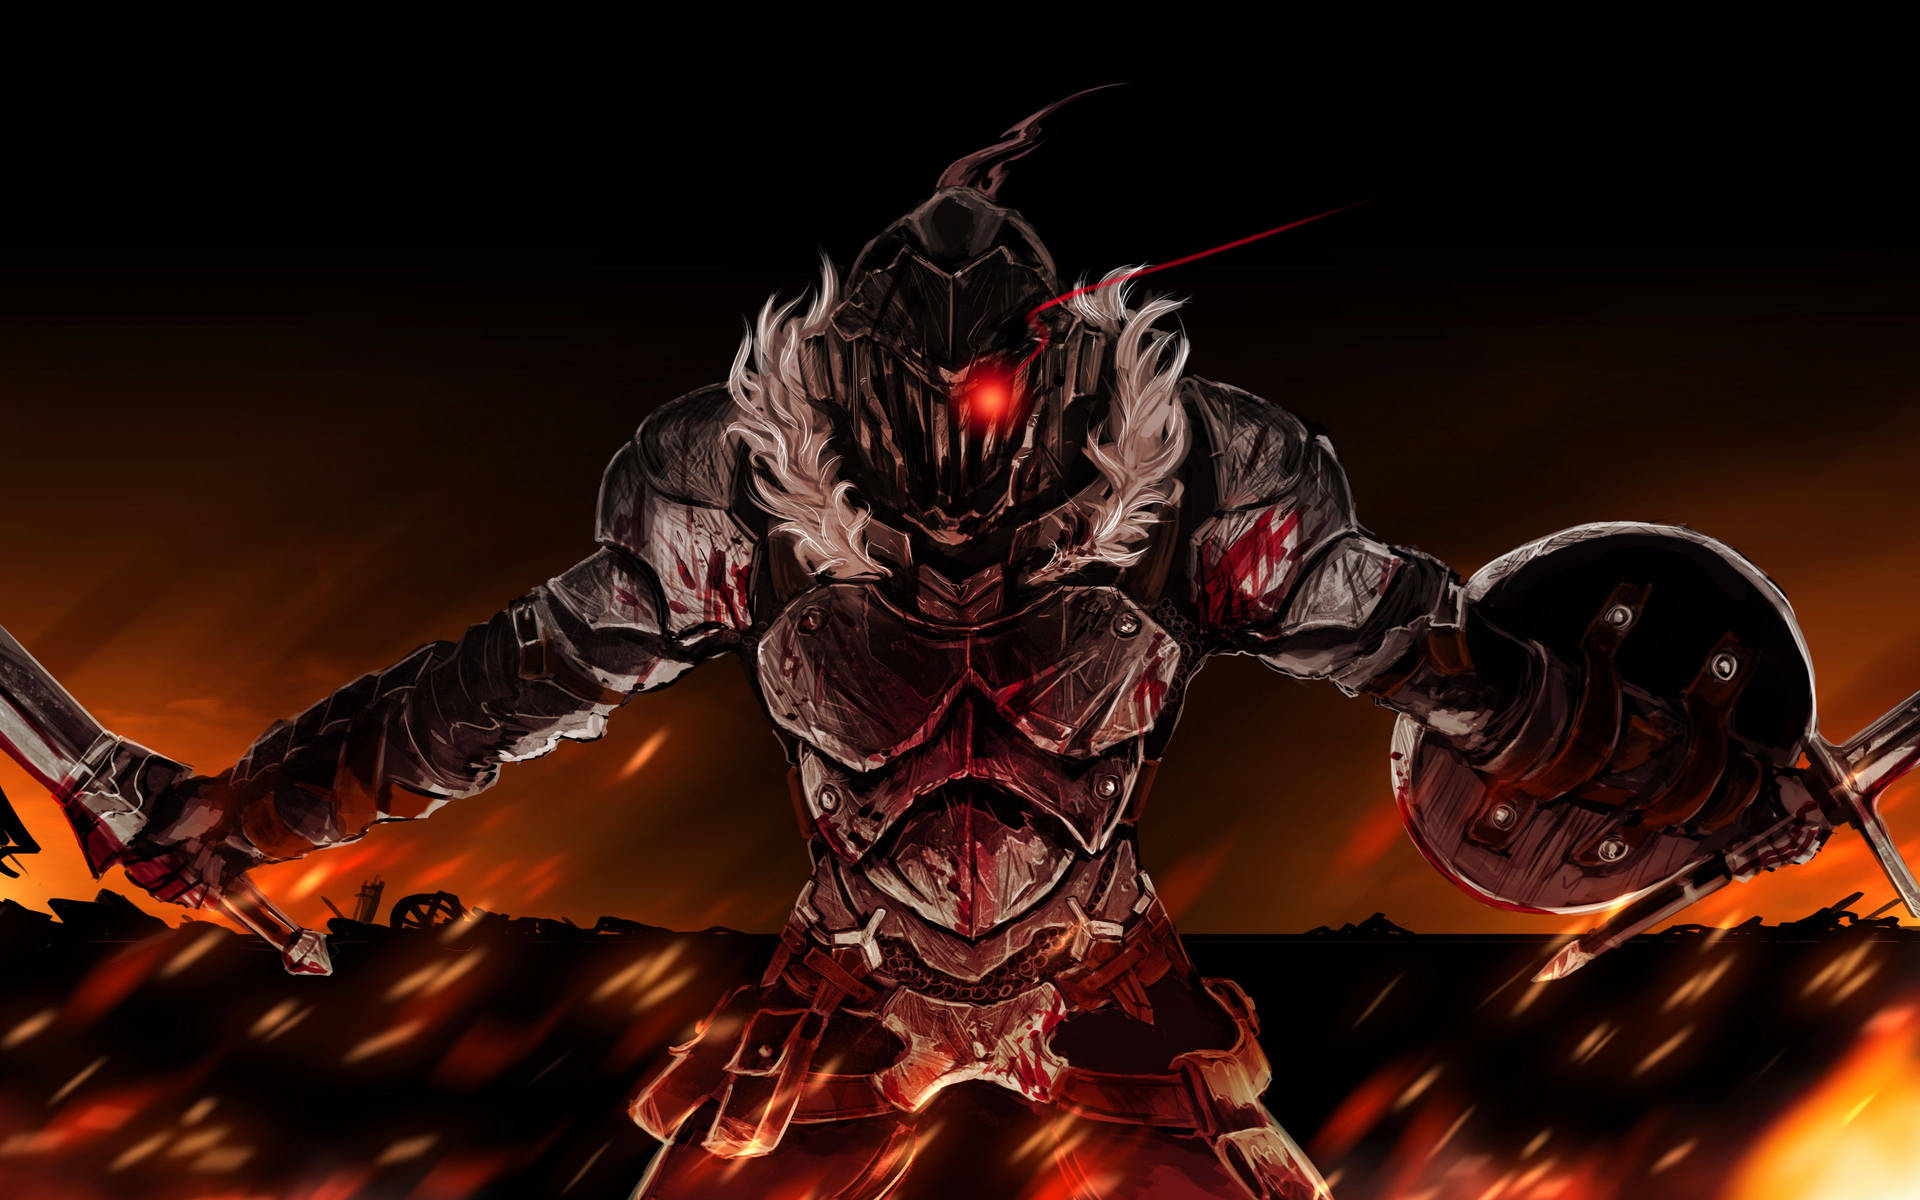 “goblin Slayer Rides To Justice” Background